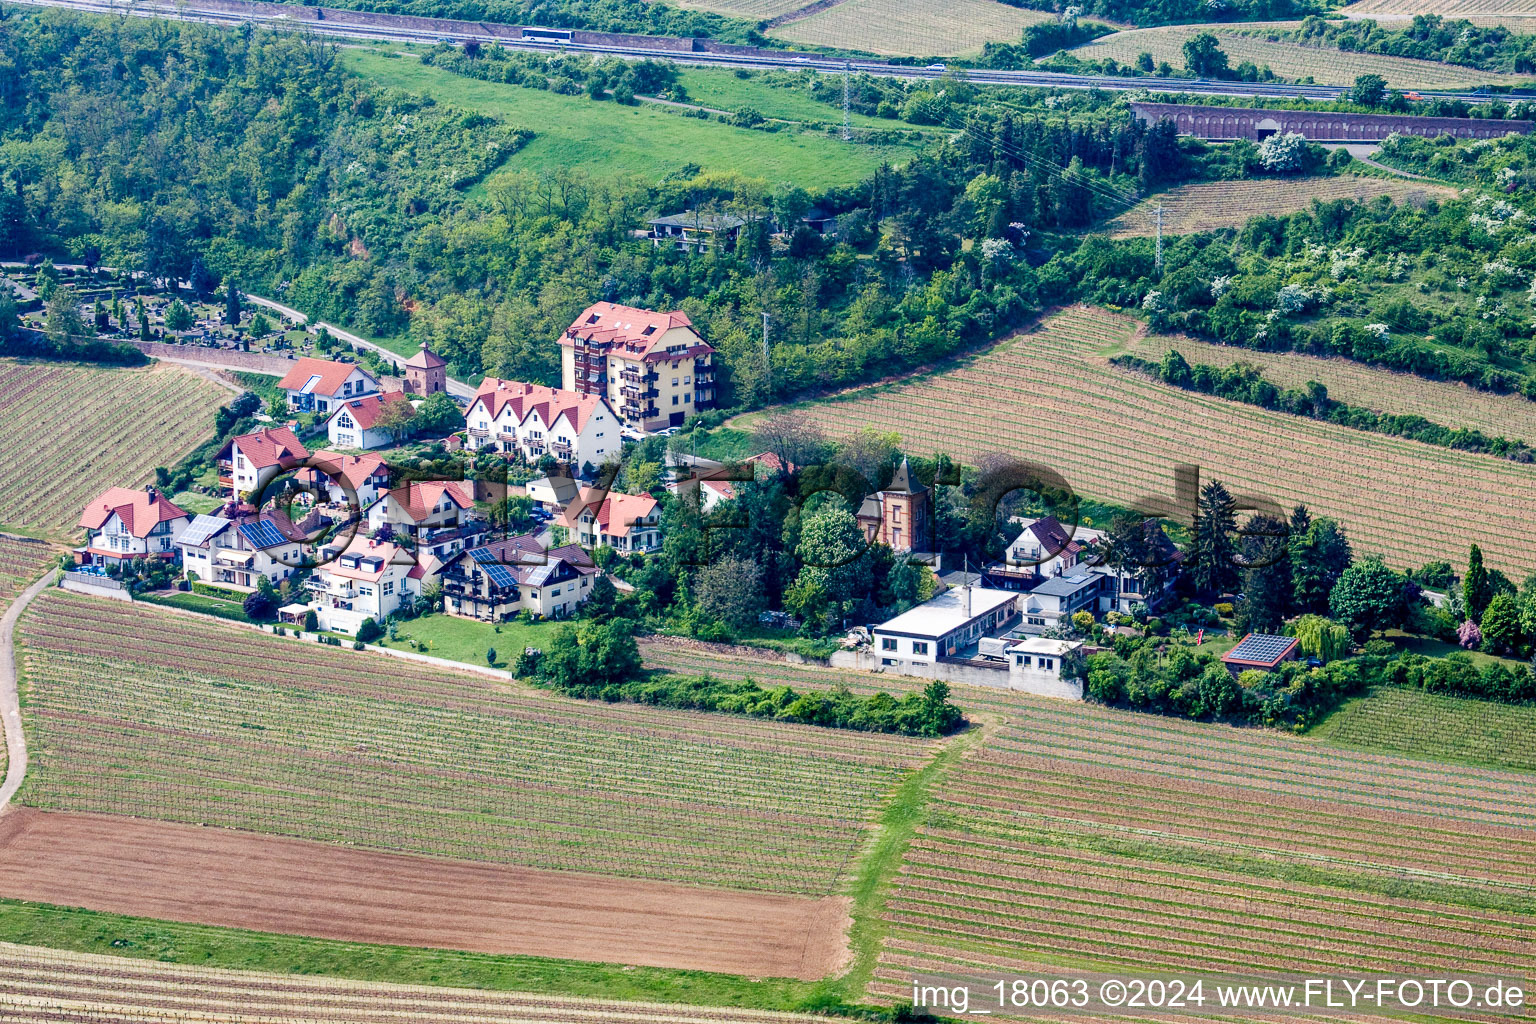 The district on Sausenheimerstrasse in Neuleiningen in the state Rhineland-Palatinate, Germany